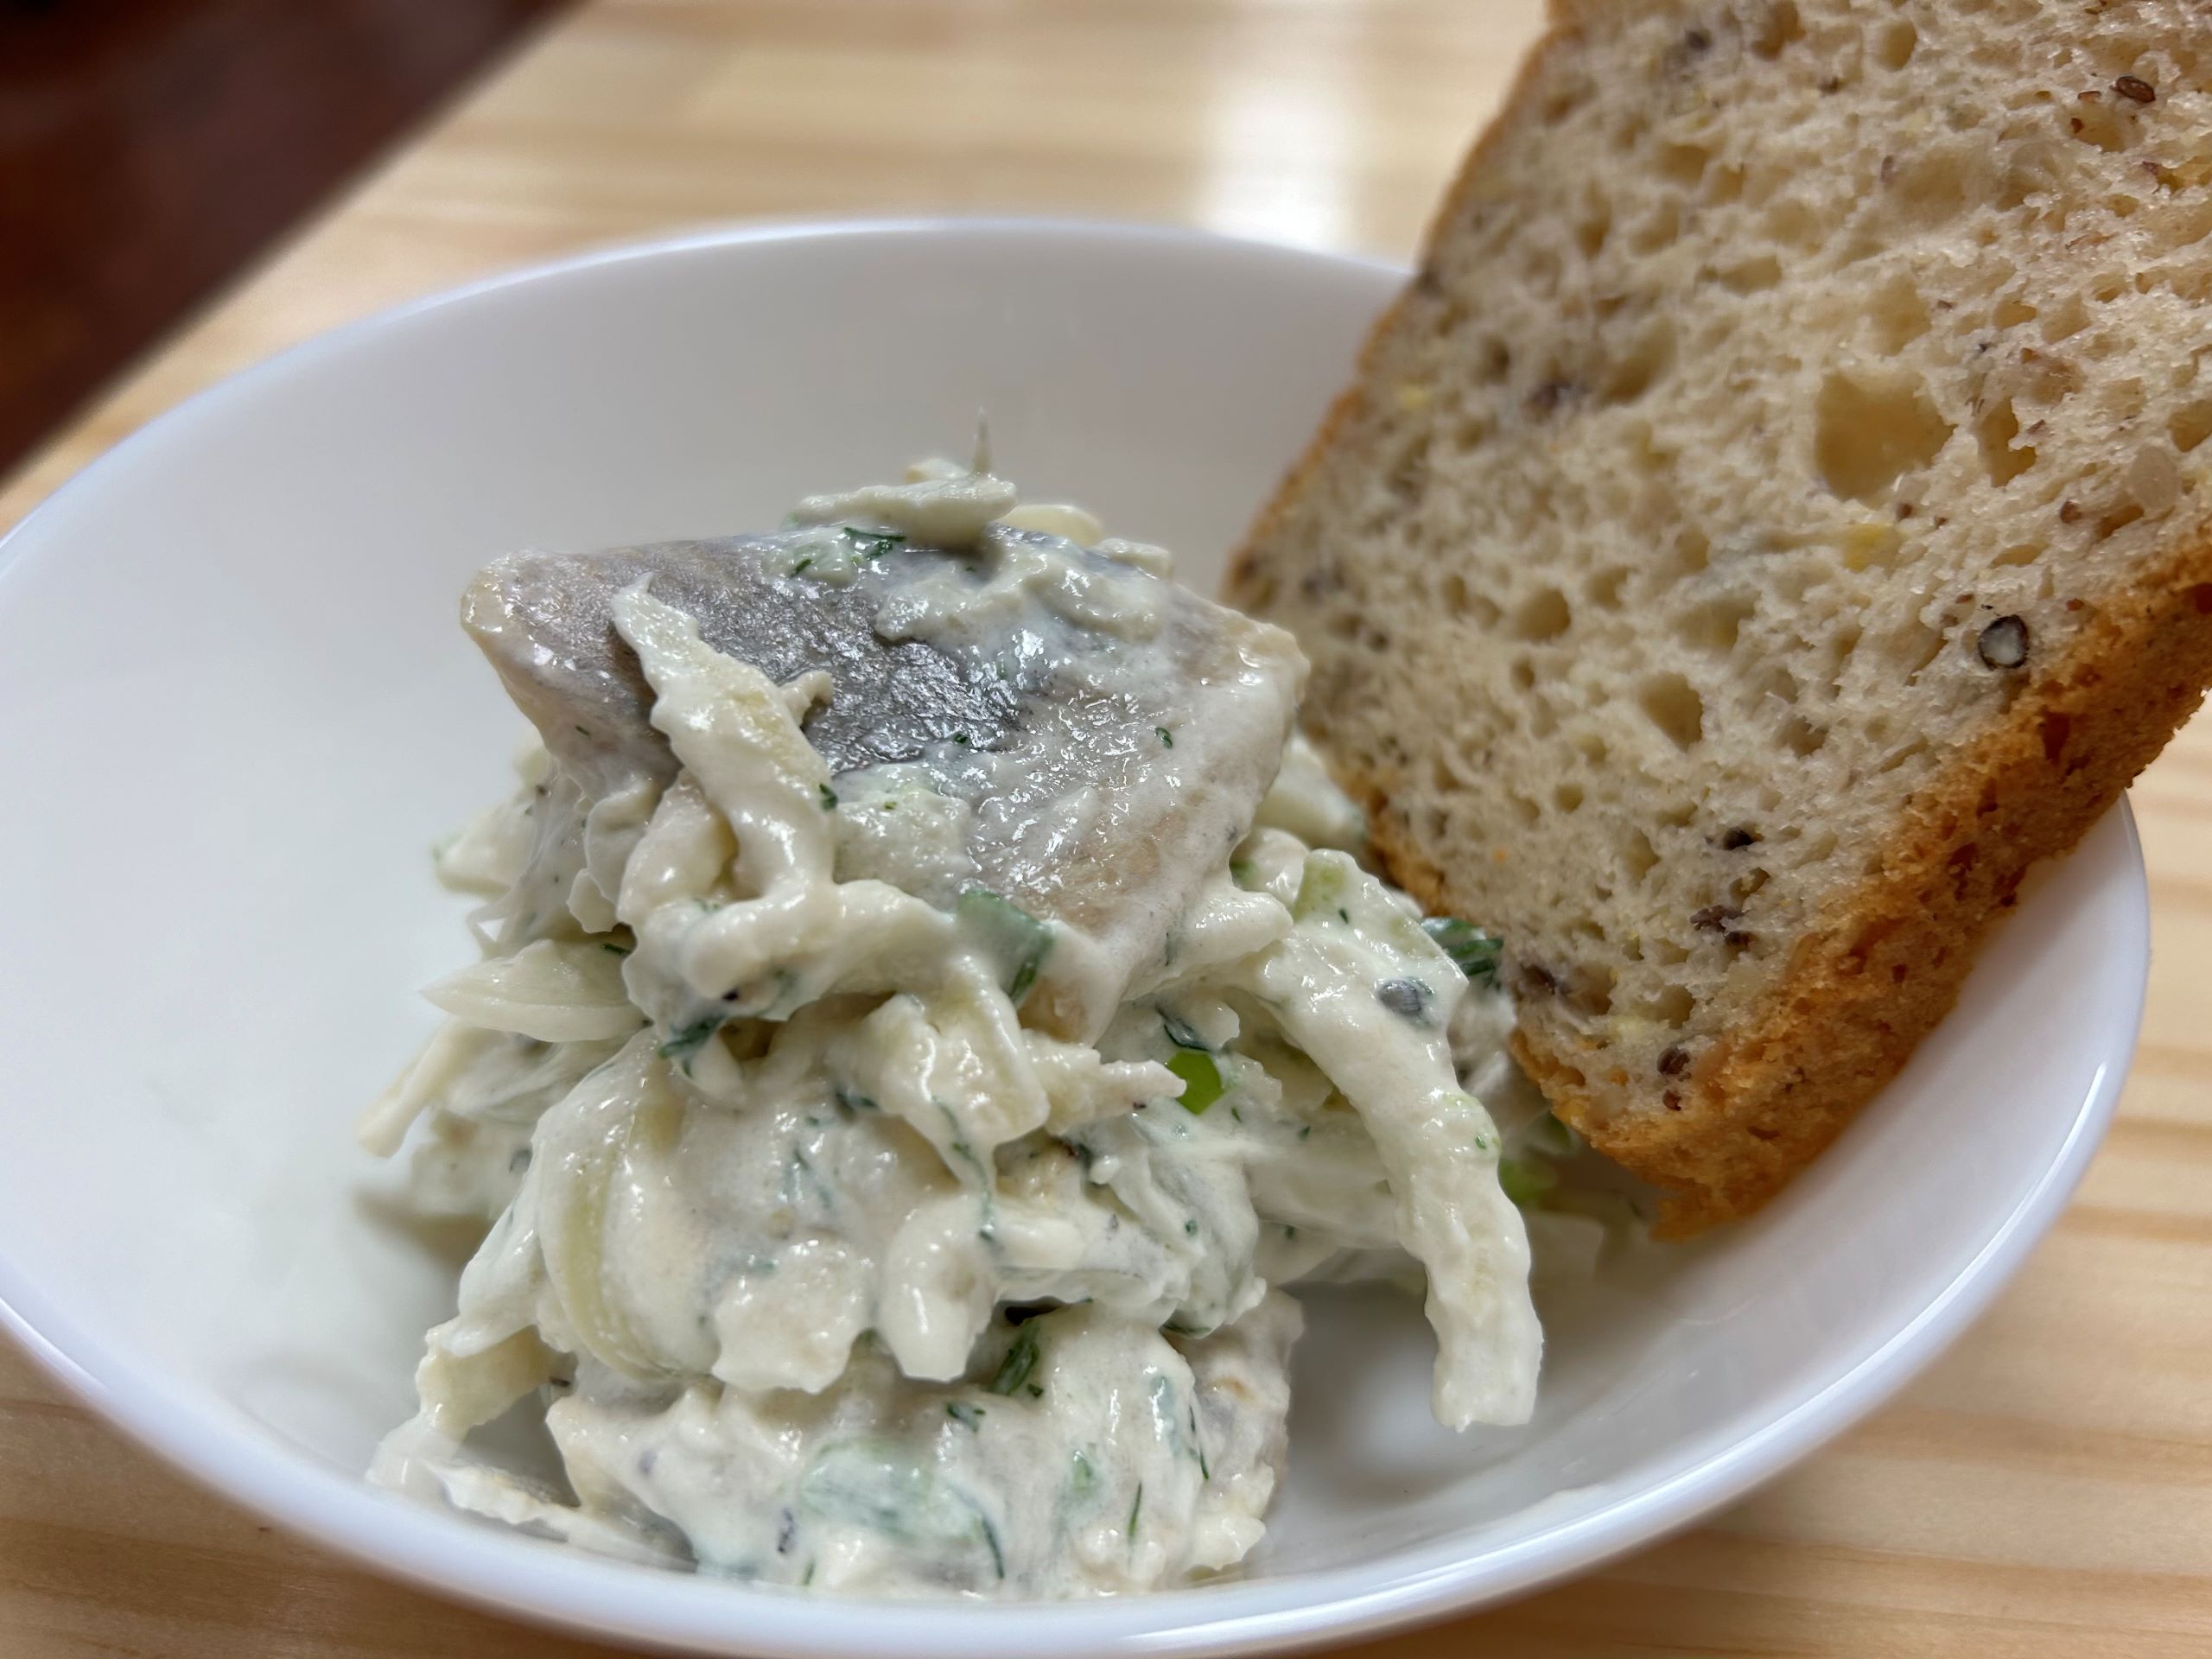 Kat's Creamy Herrings with Dill Sauce having pieces of marinated herring fillets and white creamy sauce stacked in a white dish with a slice of multi grain bread on an ash wood table.